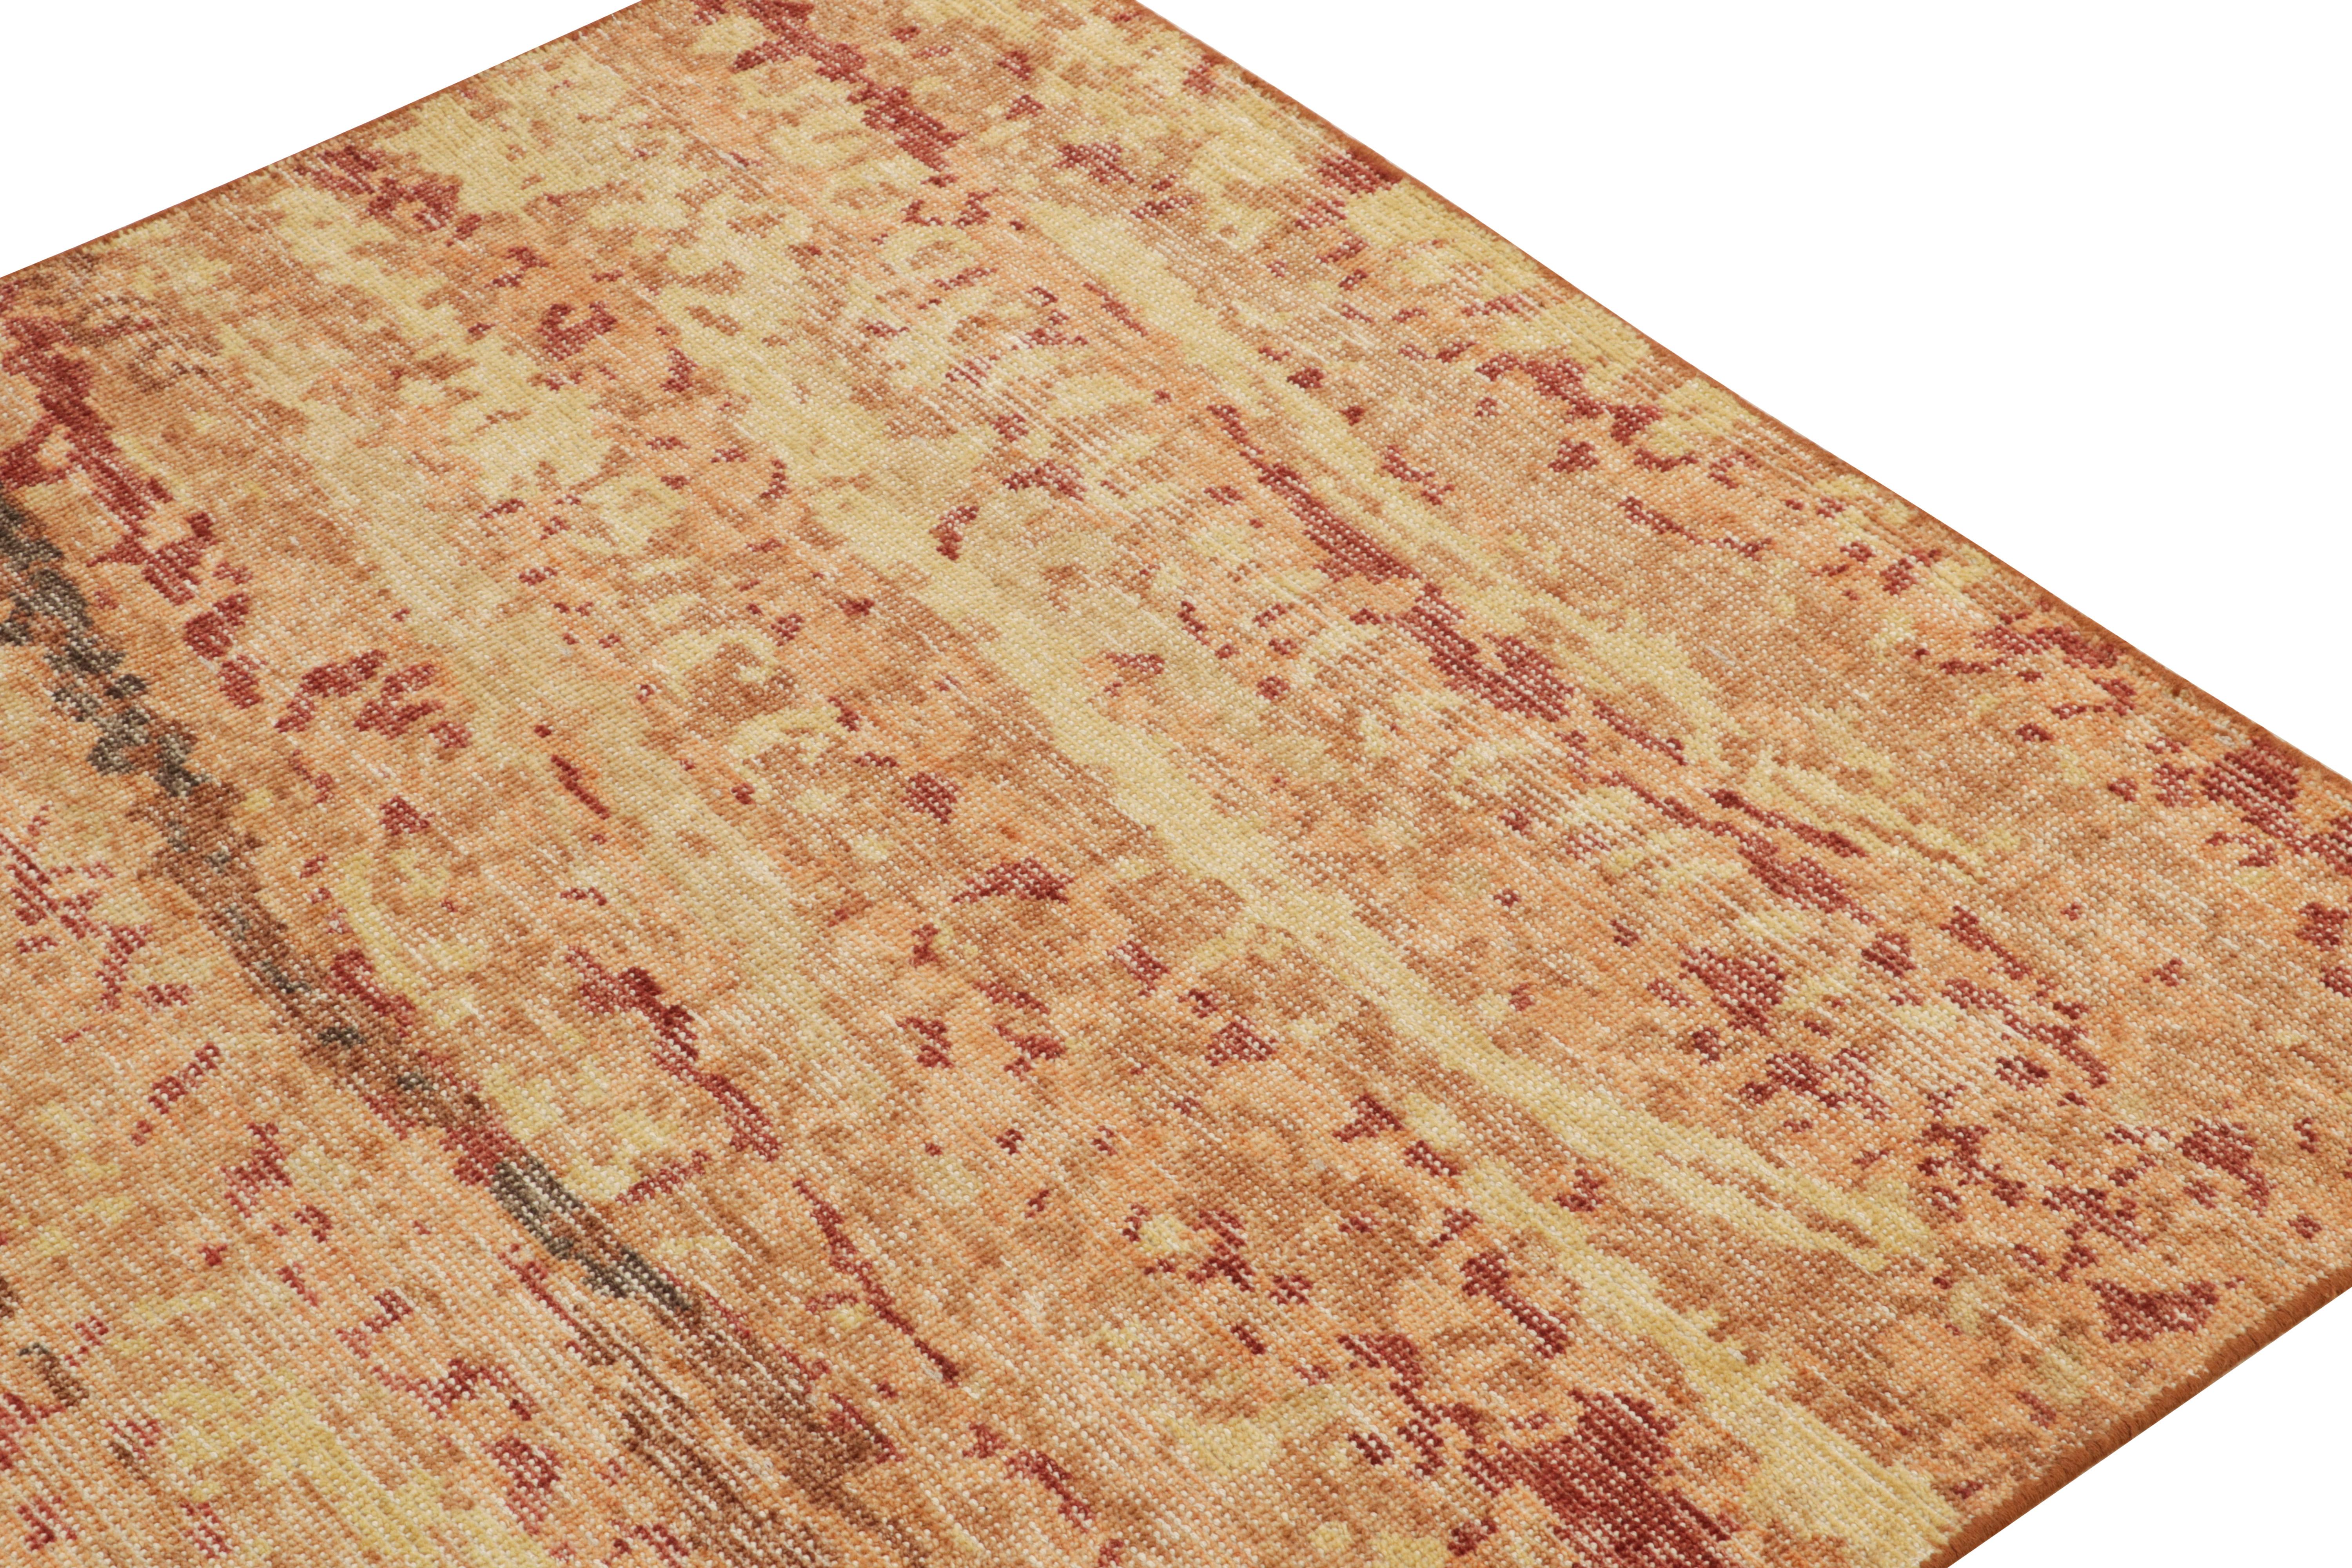 Hand-Knotted Rug & Kilim's Distressed Style Rug in Red, Orange & Gold Abstract Pattern For Sale